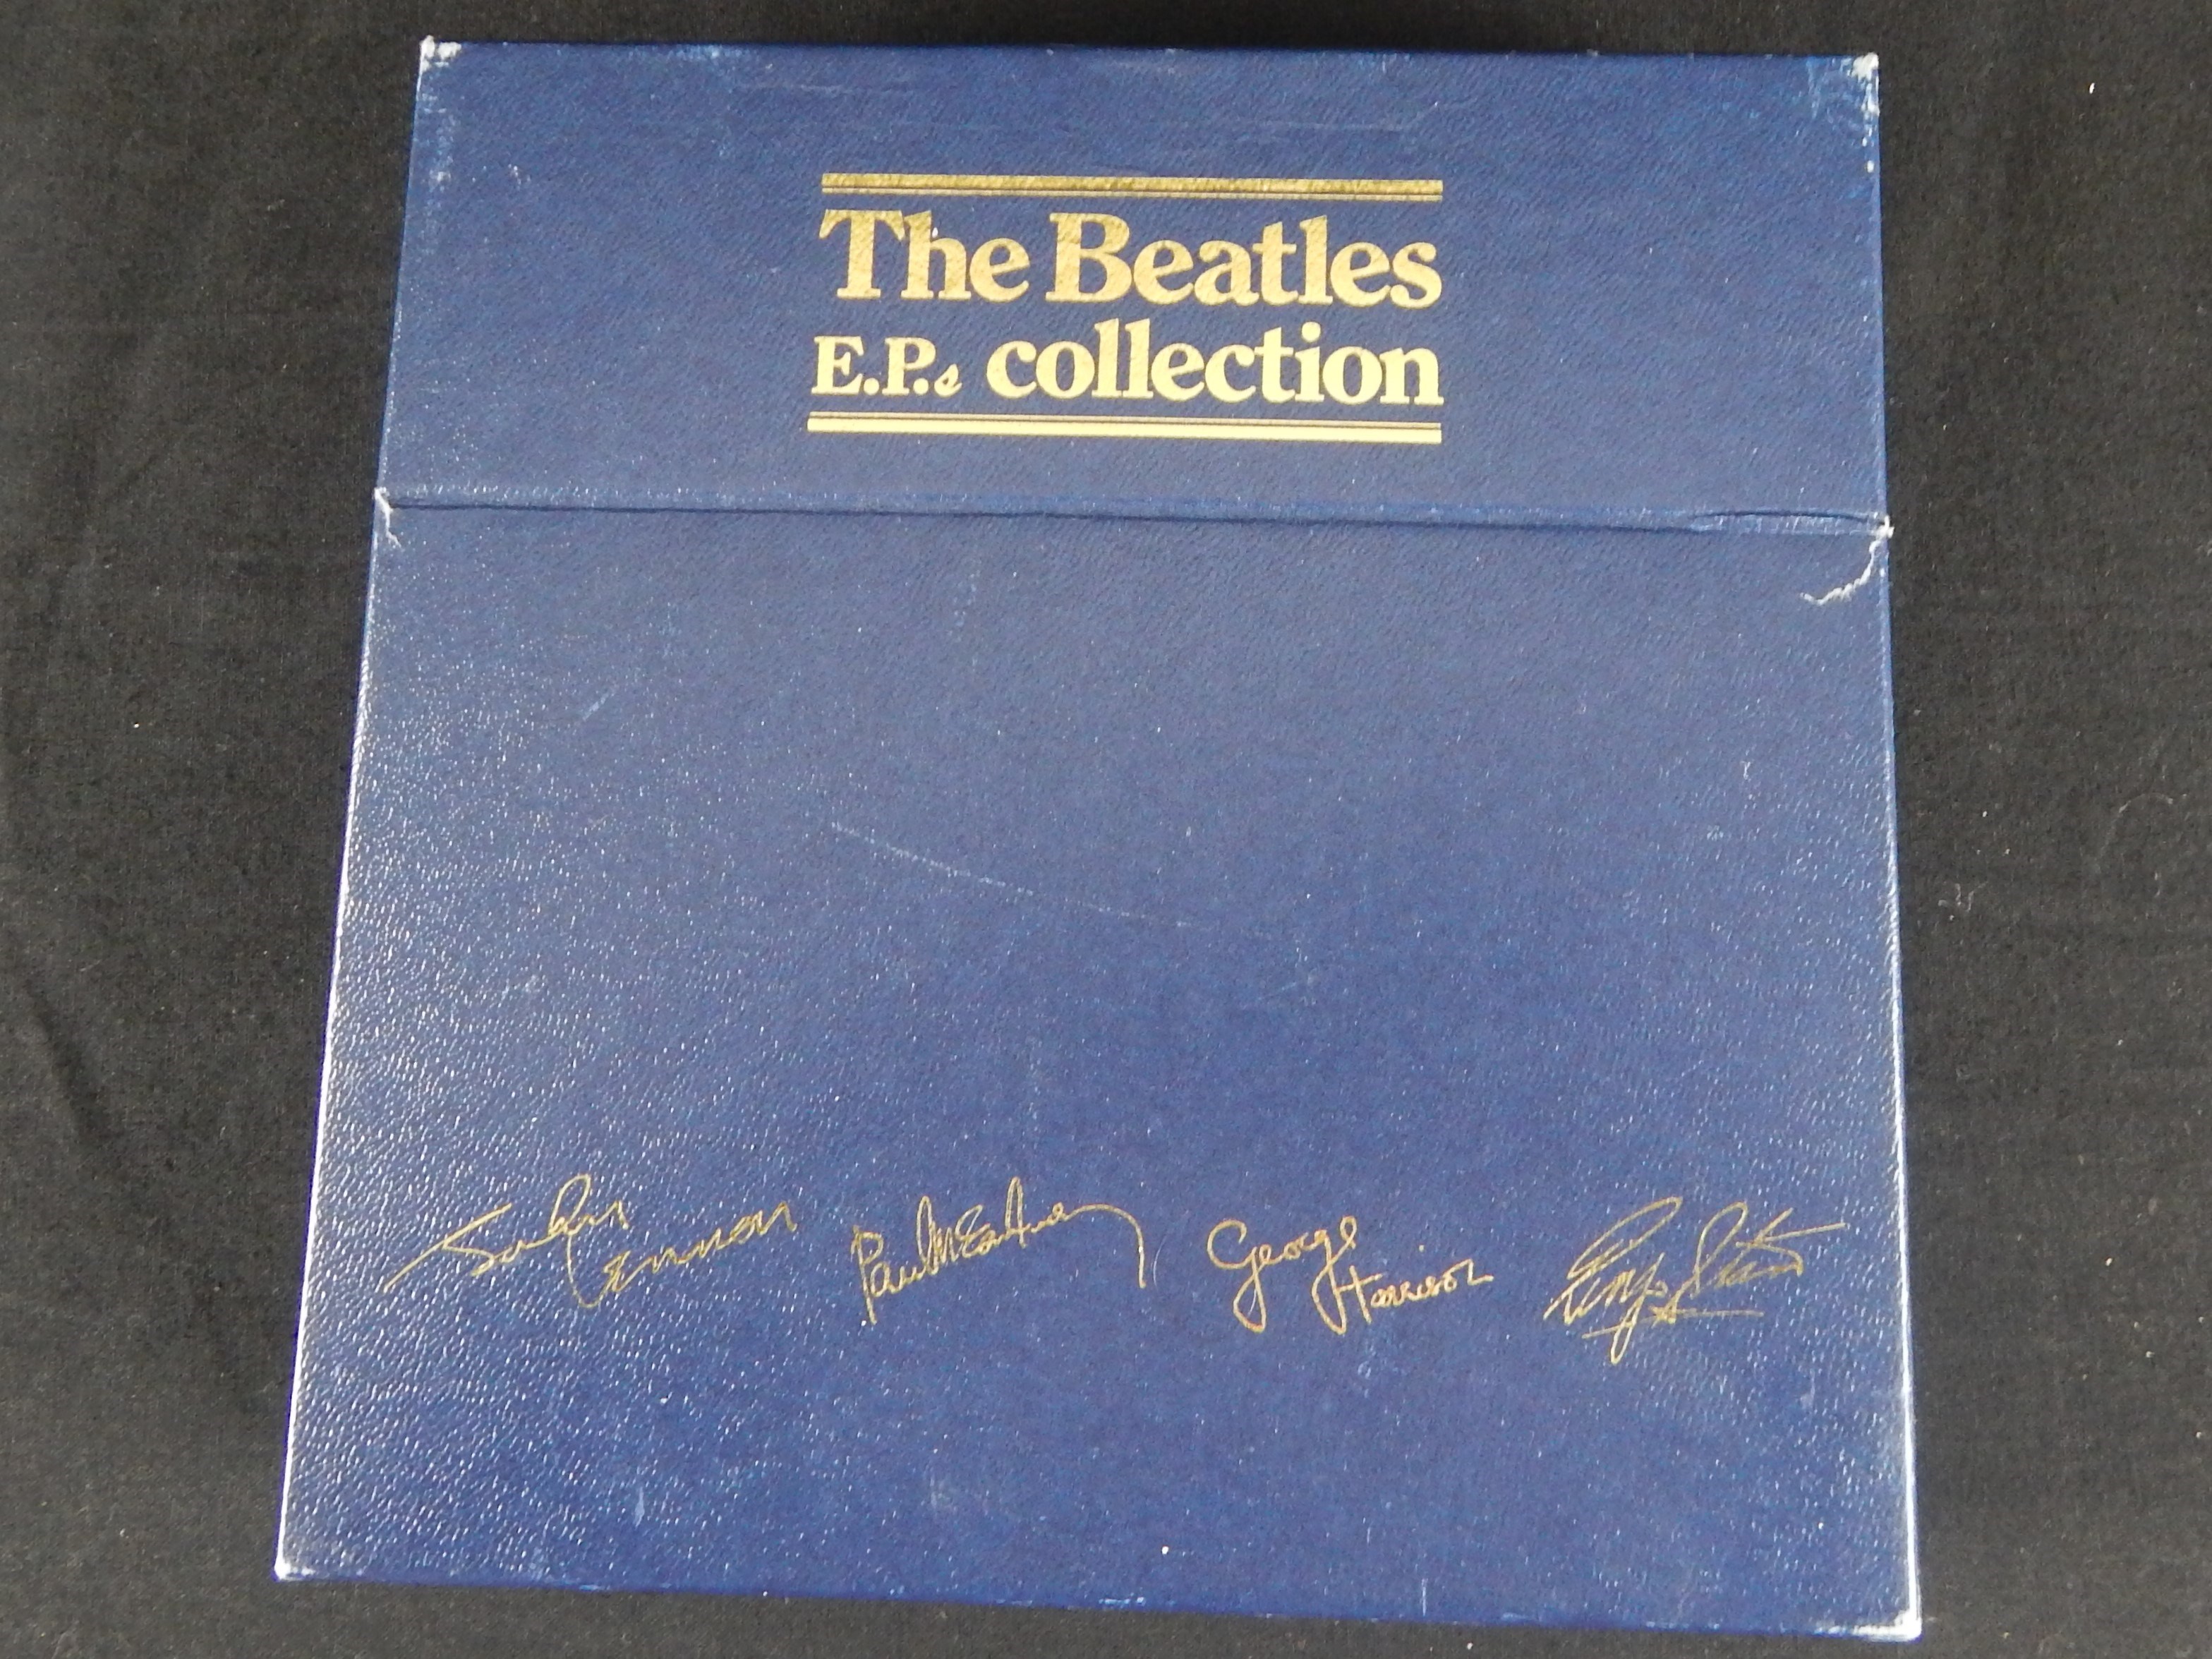 Rock 'N' Roll - 1981 The Beatles EP Collection Complete Set in Original Box (UK Release)